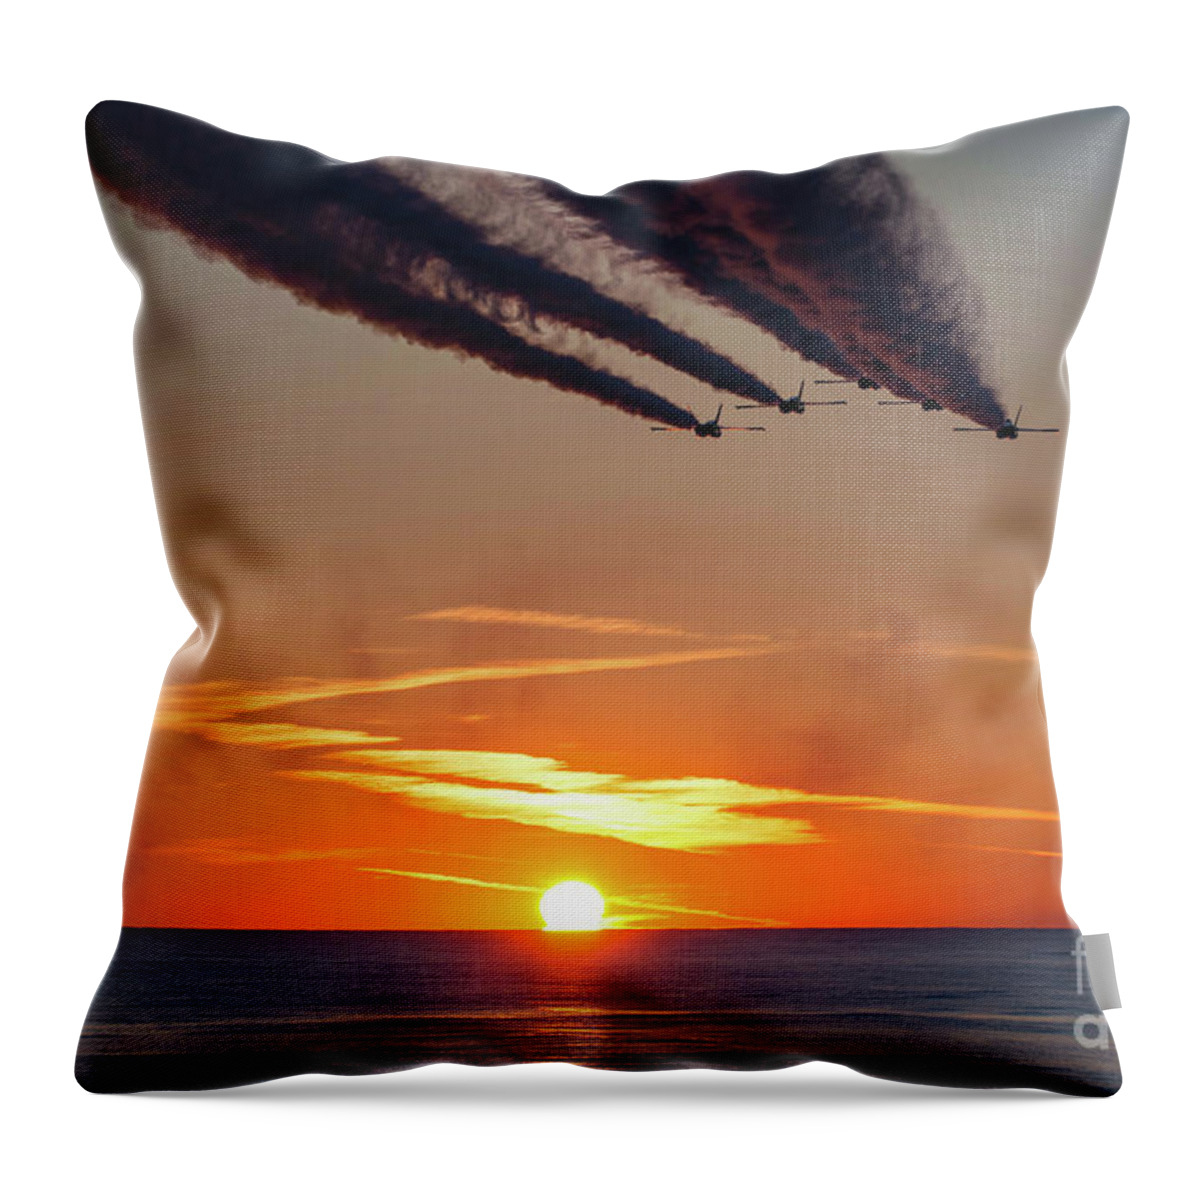 Blue Angels Throw Pillow featuring the photograph Blue Angels Flying Over The Sunset by Beachtown Views